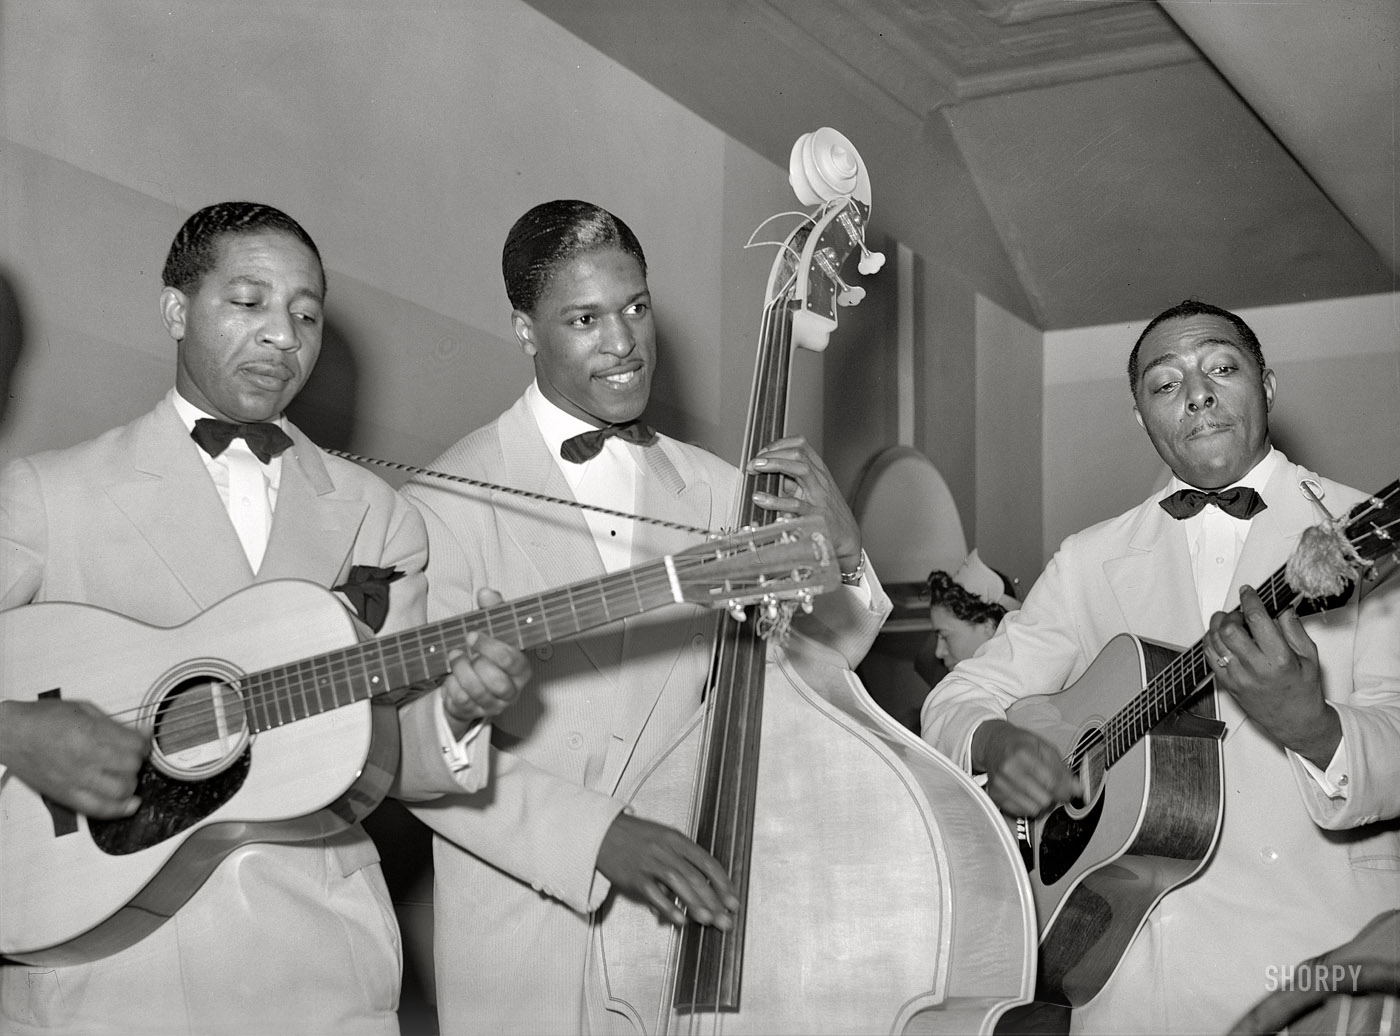 April 1941. "Entertainers at Negro tavern. South Side Chicago." On the left is Lonnie Johnson, noted bluesman and pioneering jazz guitarist. Who are the others? Medium format safety negative by Russell Lee. View full size.